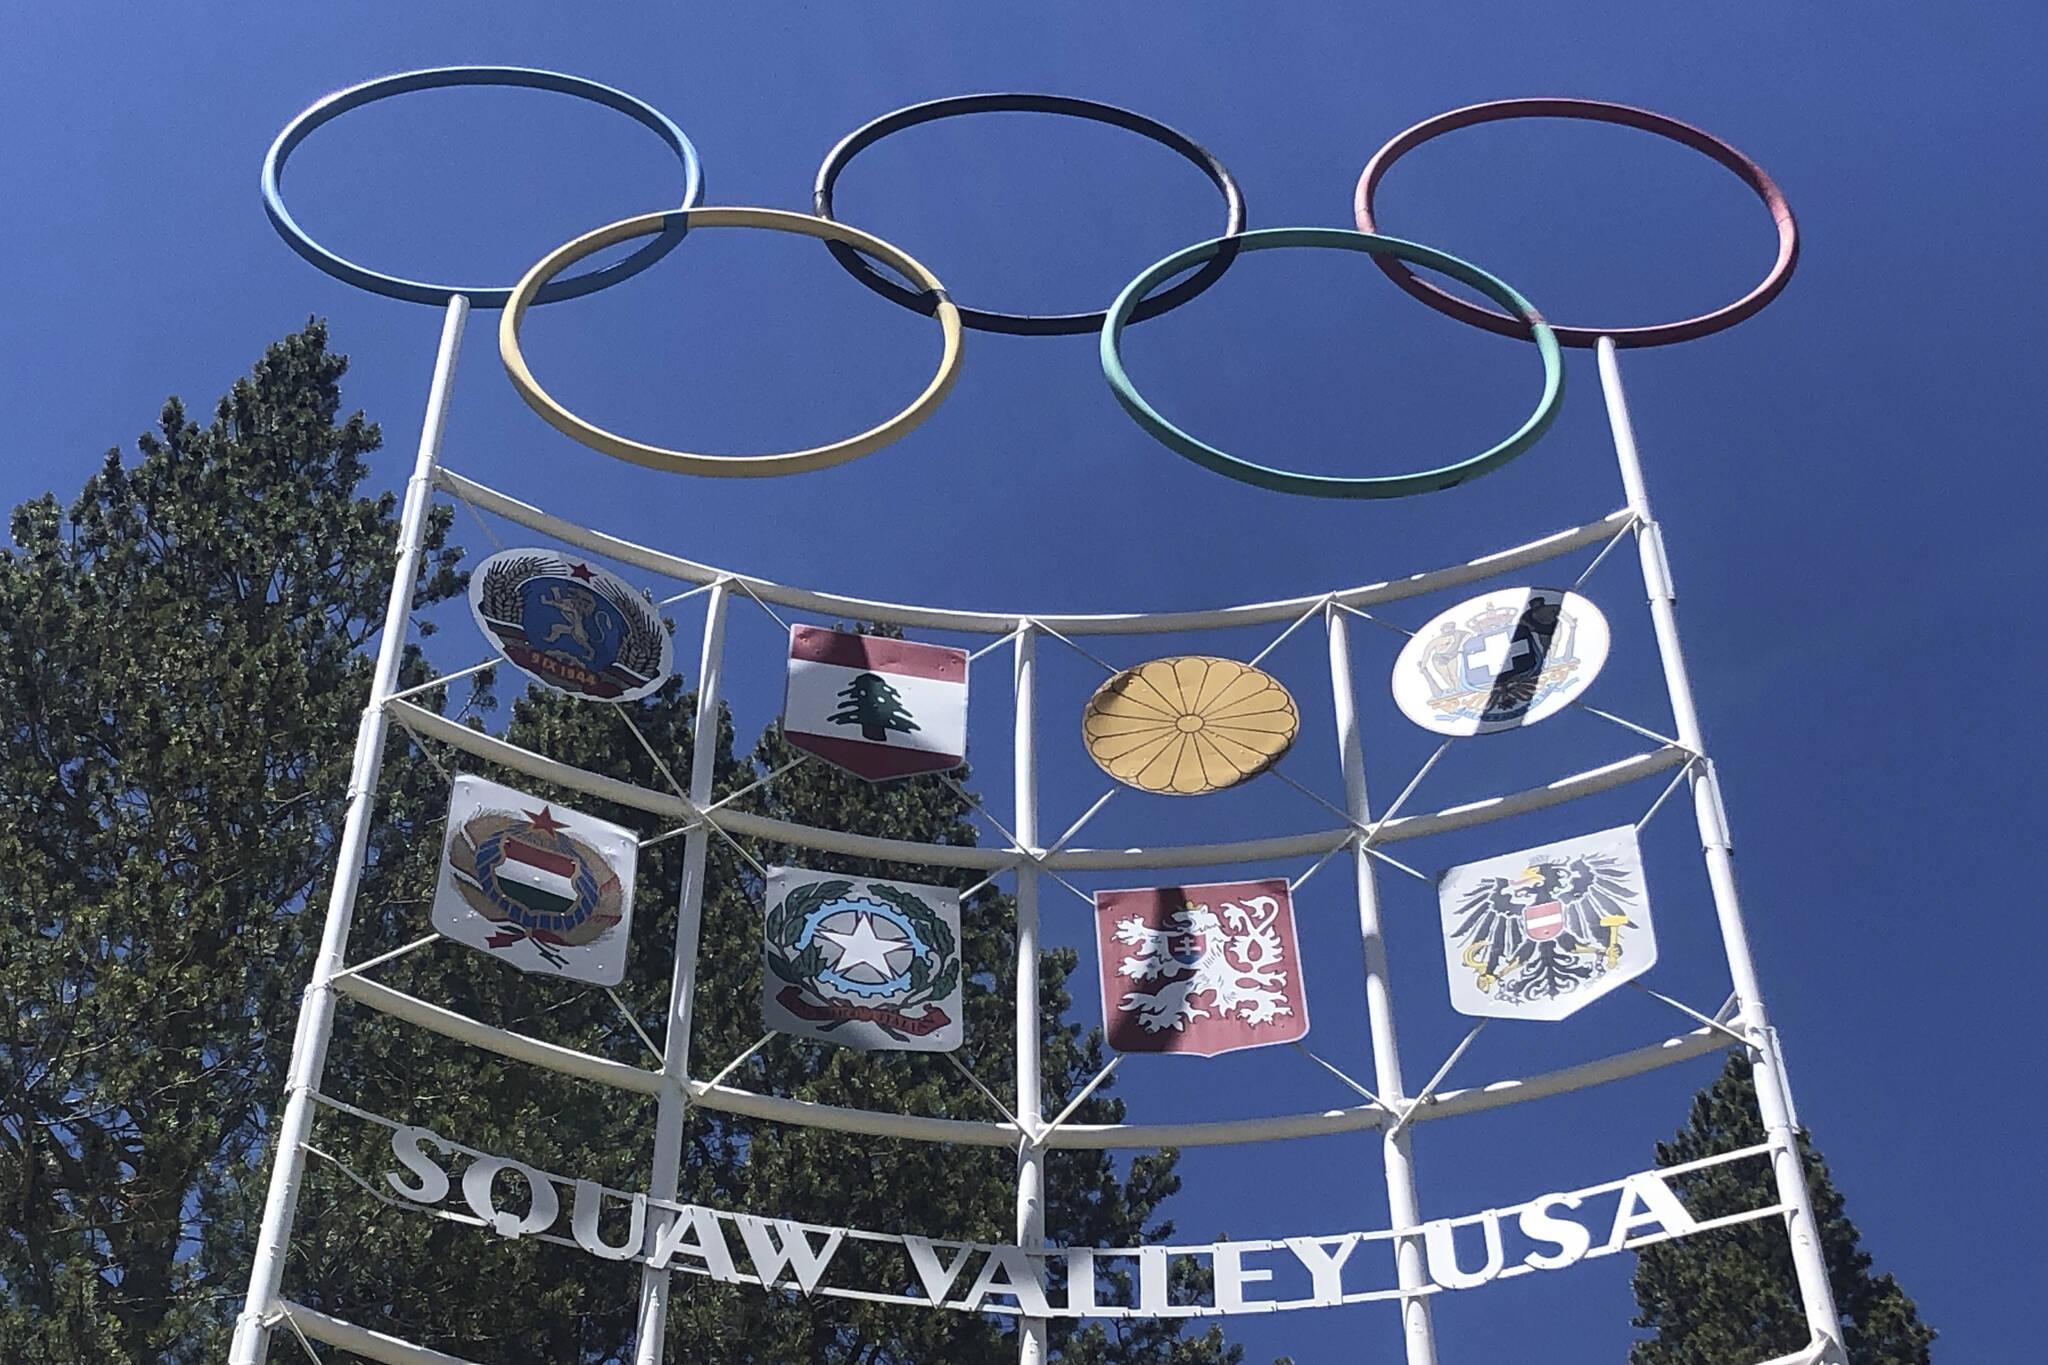 FILE - The Olympic rings stand atop a sign at the entrance to the Squaw Valley Ski Resort in Olympic Valley, Calif., on July 8, 2020. U.S. Interior Secretary Deb Haaland on Friday, Nov. 19, 2021, declared "squaw" to be a derogatory term and said she is taking steps to remove the term from federal government use and to replace other derogatory place names. The popular California ski resort changed its name to Palisades Tahoe earlier this year. (AP Photo/Haven Daley, File)